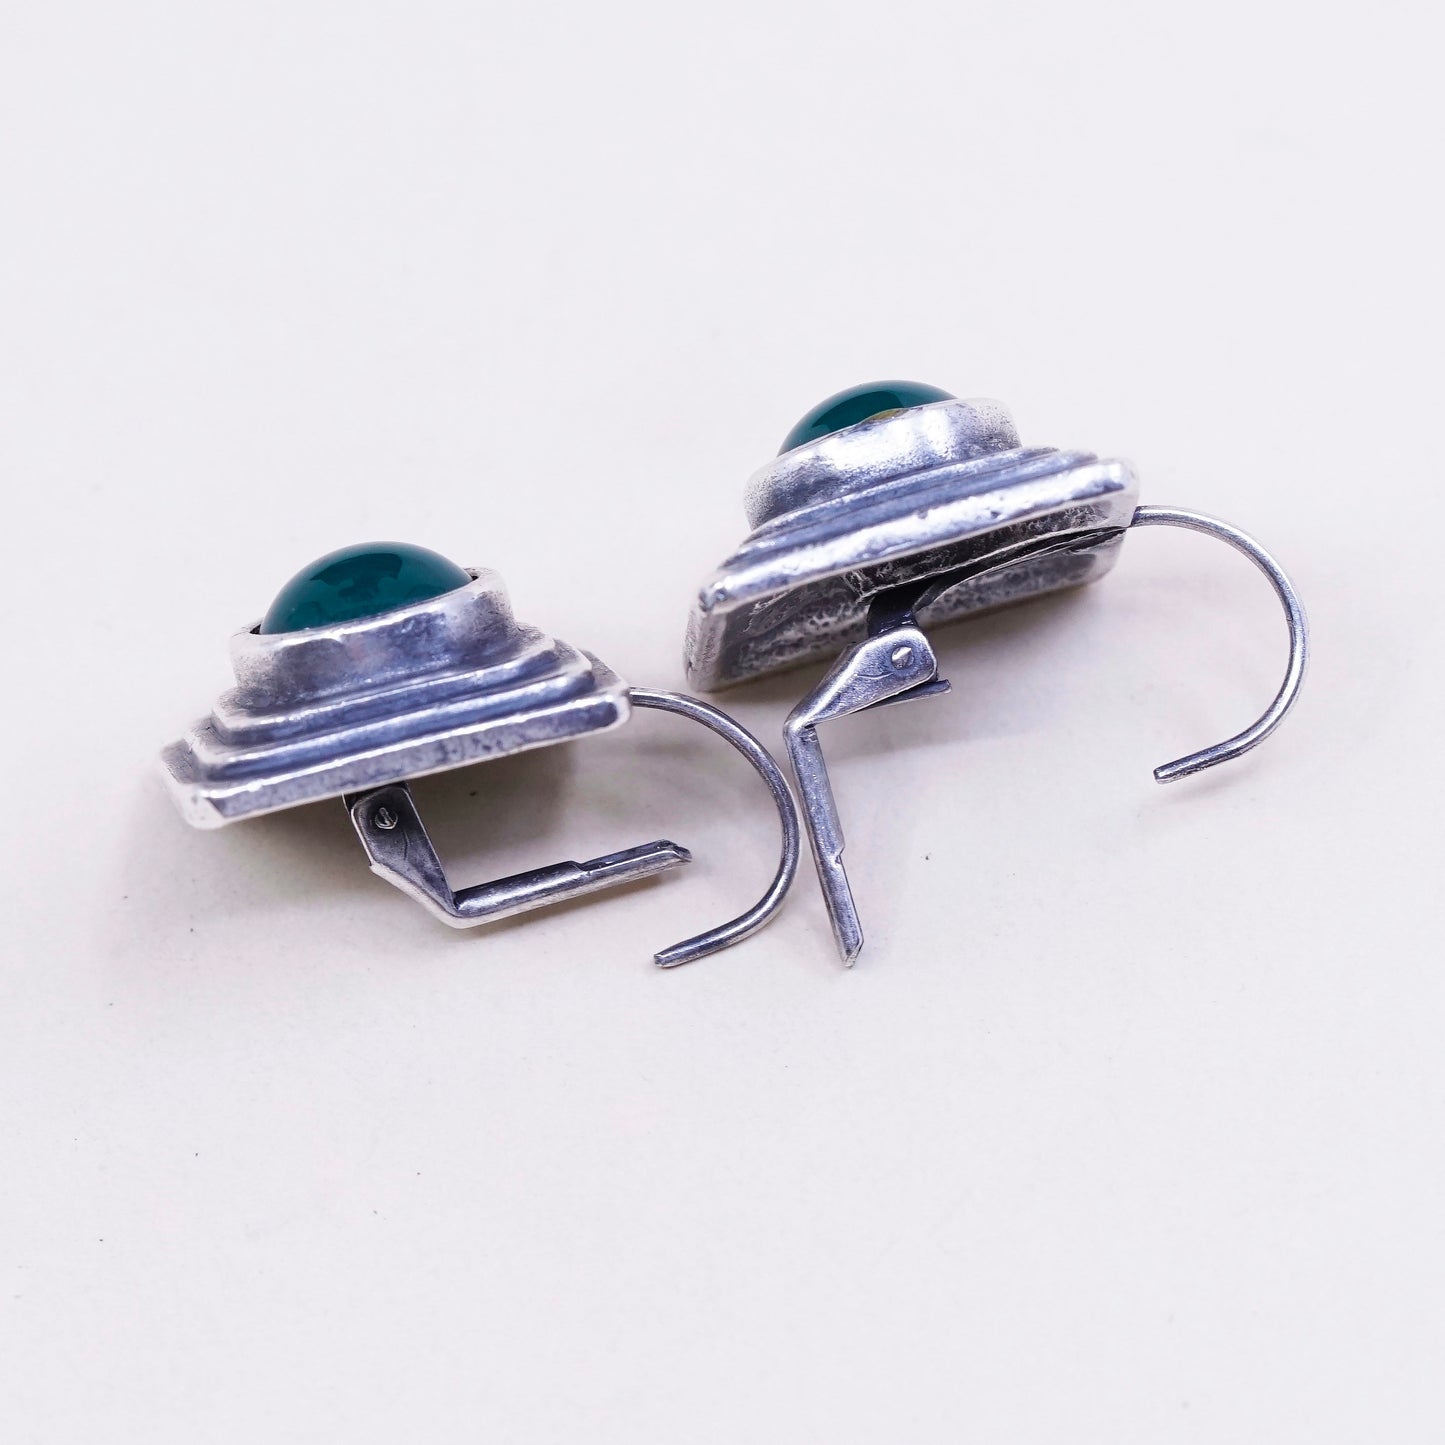 Vintage venue usa silver tone ribbed earrings with green beads